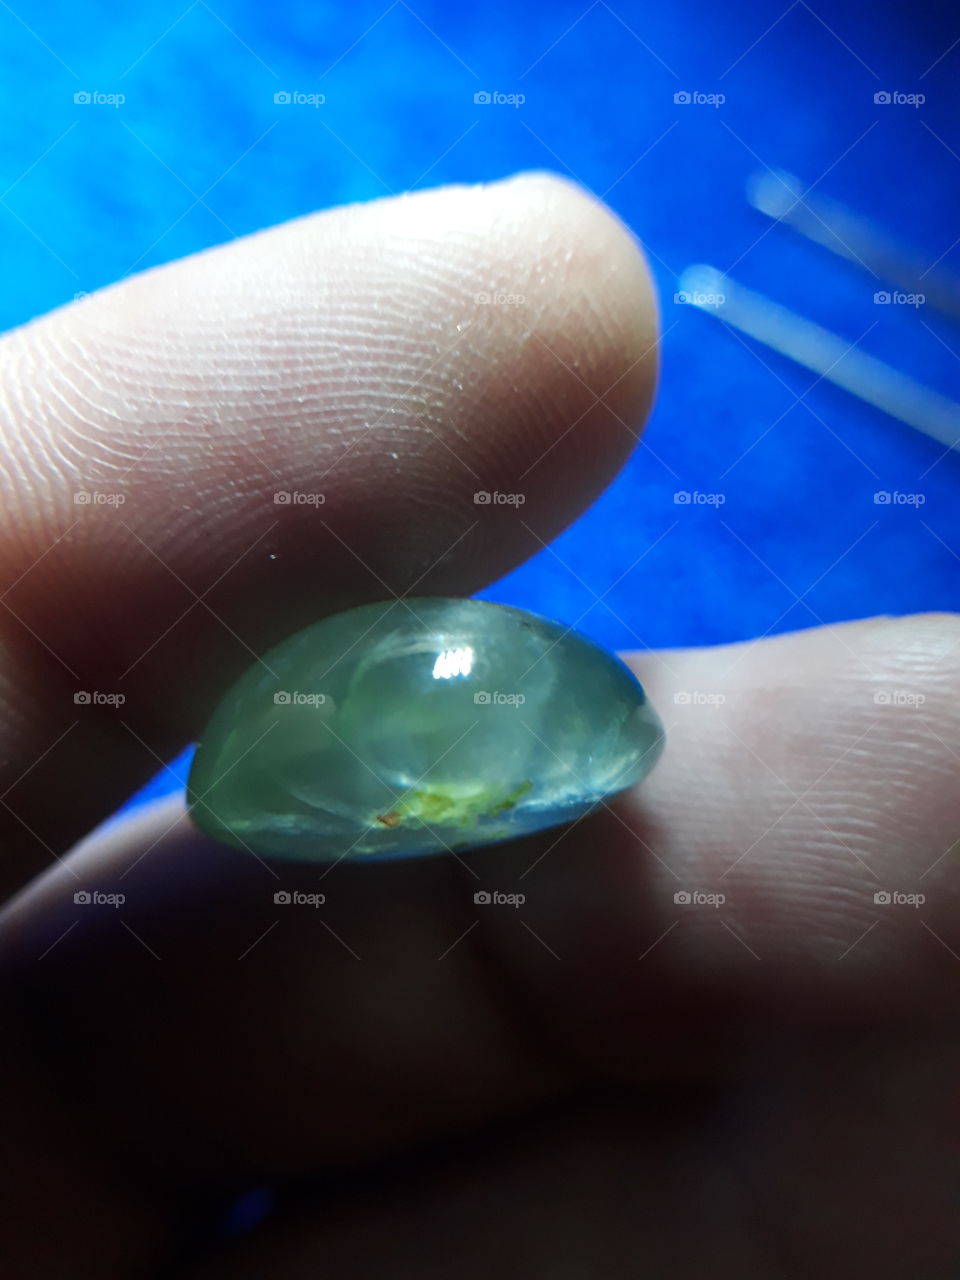 Available on #etsy and #ebay

Gemstone Information.

GEM TYPE  NATURAL RUTILE PREHNITE 
TOTAL CARAT WEIGHT 	25.05 Ct
SIZE 	20.00x17.00x9.50 mm
SHAPE 	Oval Cabochon
COLOR	 Green
HARDNESS 	6,0-7,0 MOH'S SCALE
QUANTITY 	1
CLARITY 	Translucent
ORIGIN 	Ta